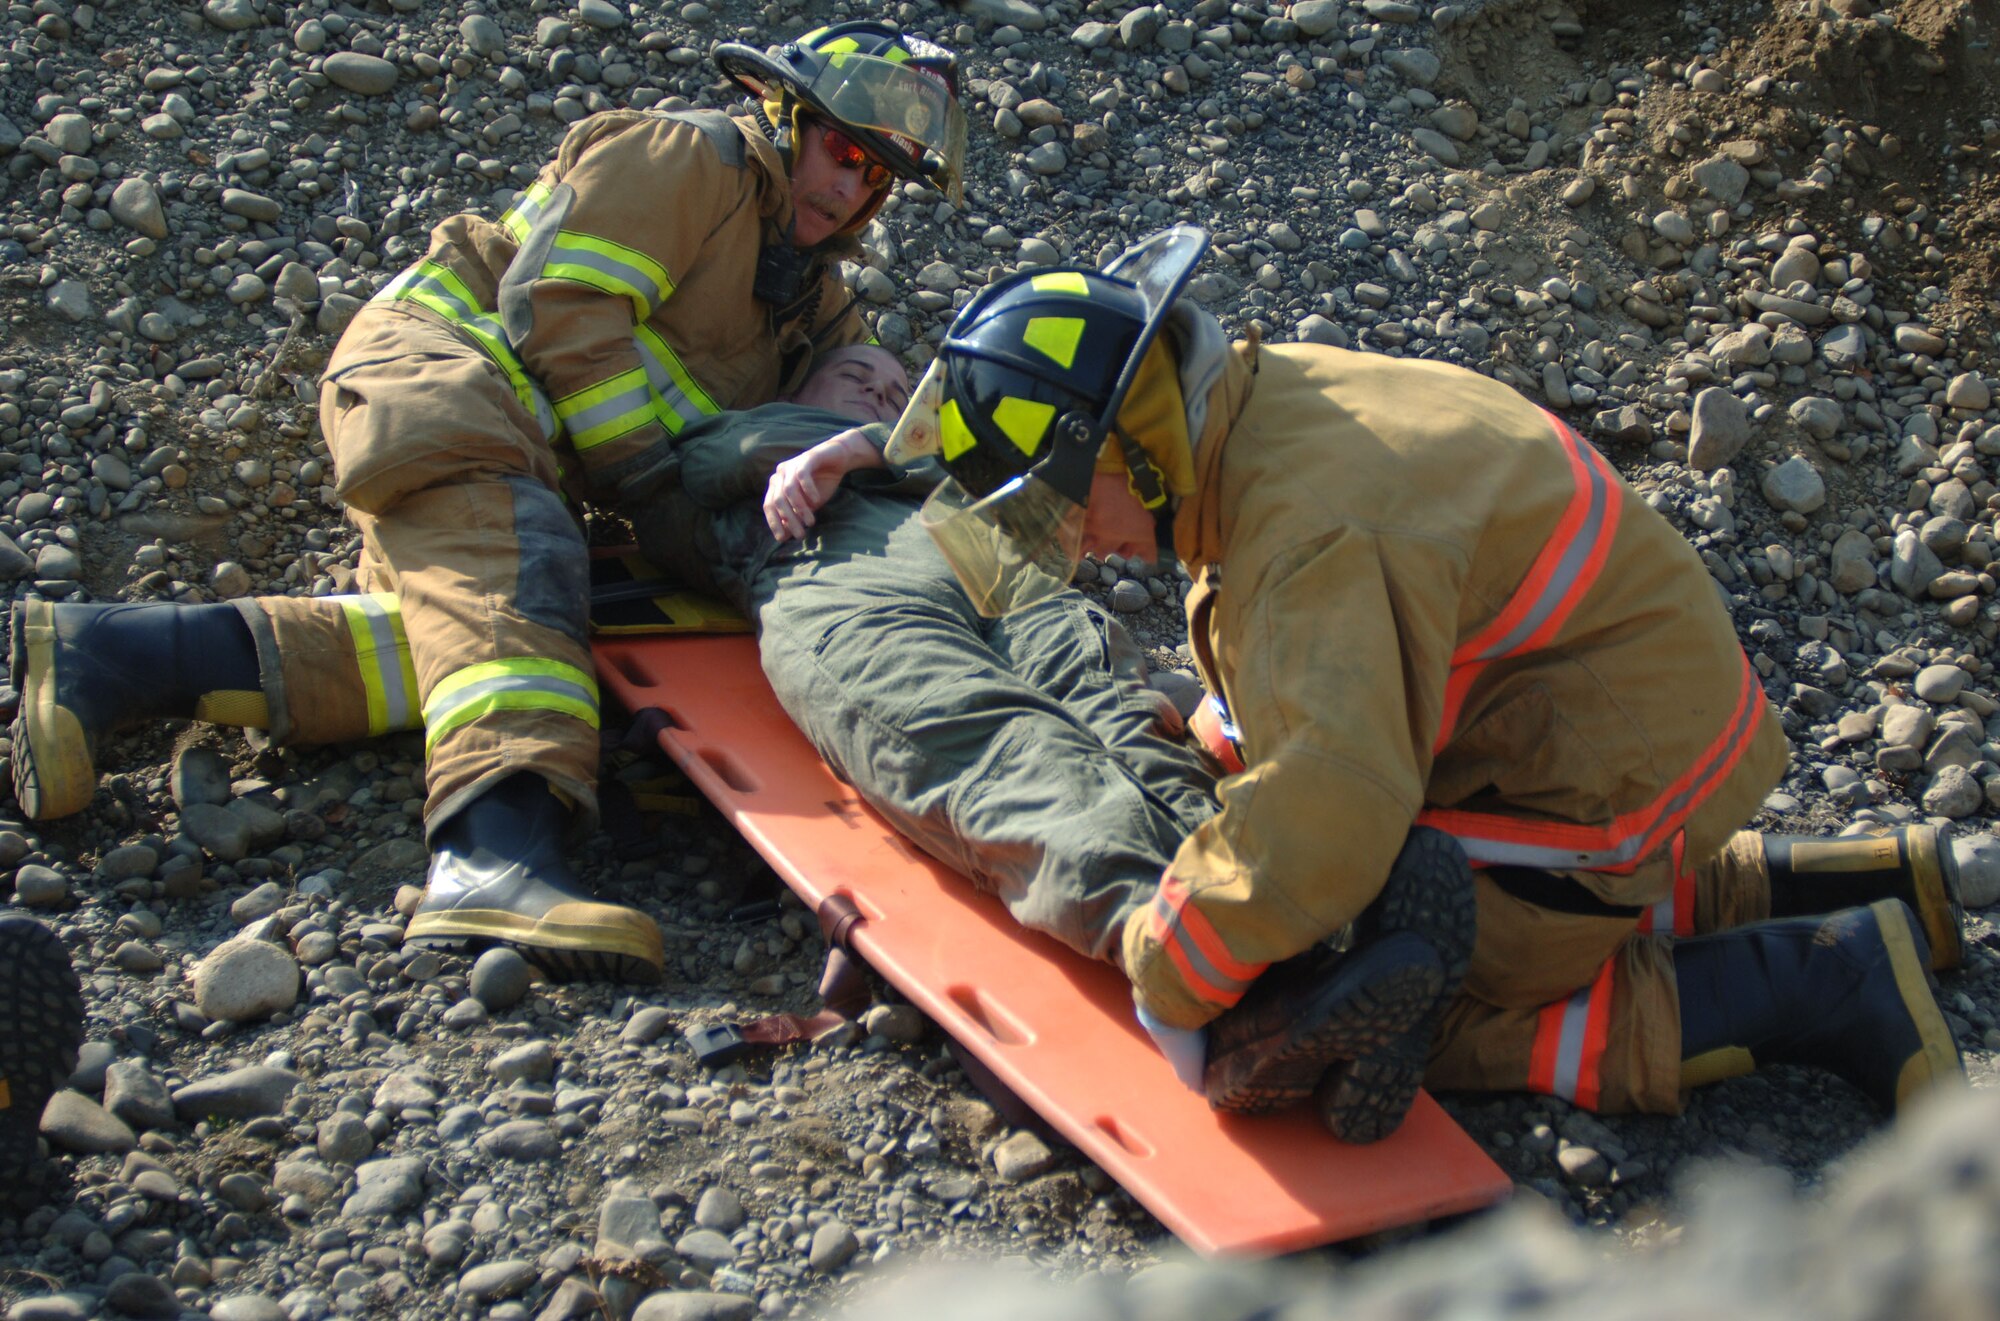 ELMENDORF AIR FORCE BASE, Alaska (May 15, 2007) – Elmendorf Air Force Base firefighters place a simulated accident victim on a backboard in preparation for movement to higher medical care as part of a scenario for Alaska Shield/Northern Edge 07. AKS/NE 07 is a State of Alaska/US NORTHCOM sponsored homeland defense/defense support of civil authorities exercise; part of the national-level Ardent Sentry/Northern Edge 07.  The exercise is an opportunity to practice responding to homeland defense/disaster events with the federal, state, local & private-sector team. U.S. Navy photo by Mass Communication Specialist 1st Class Daniel N. Woods